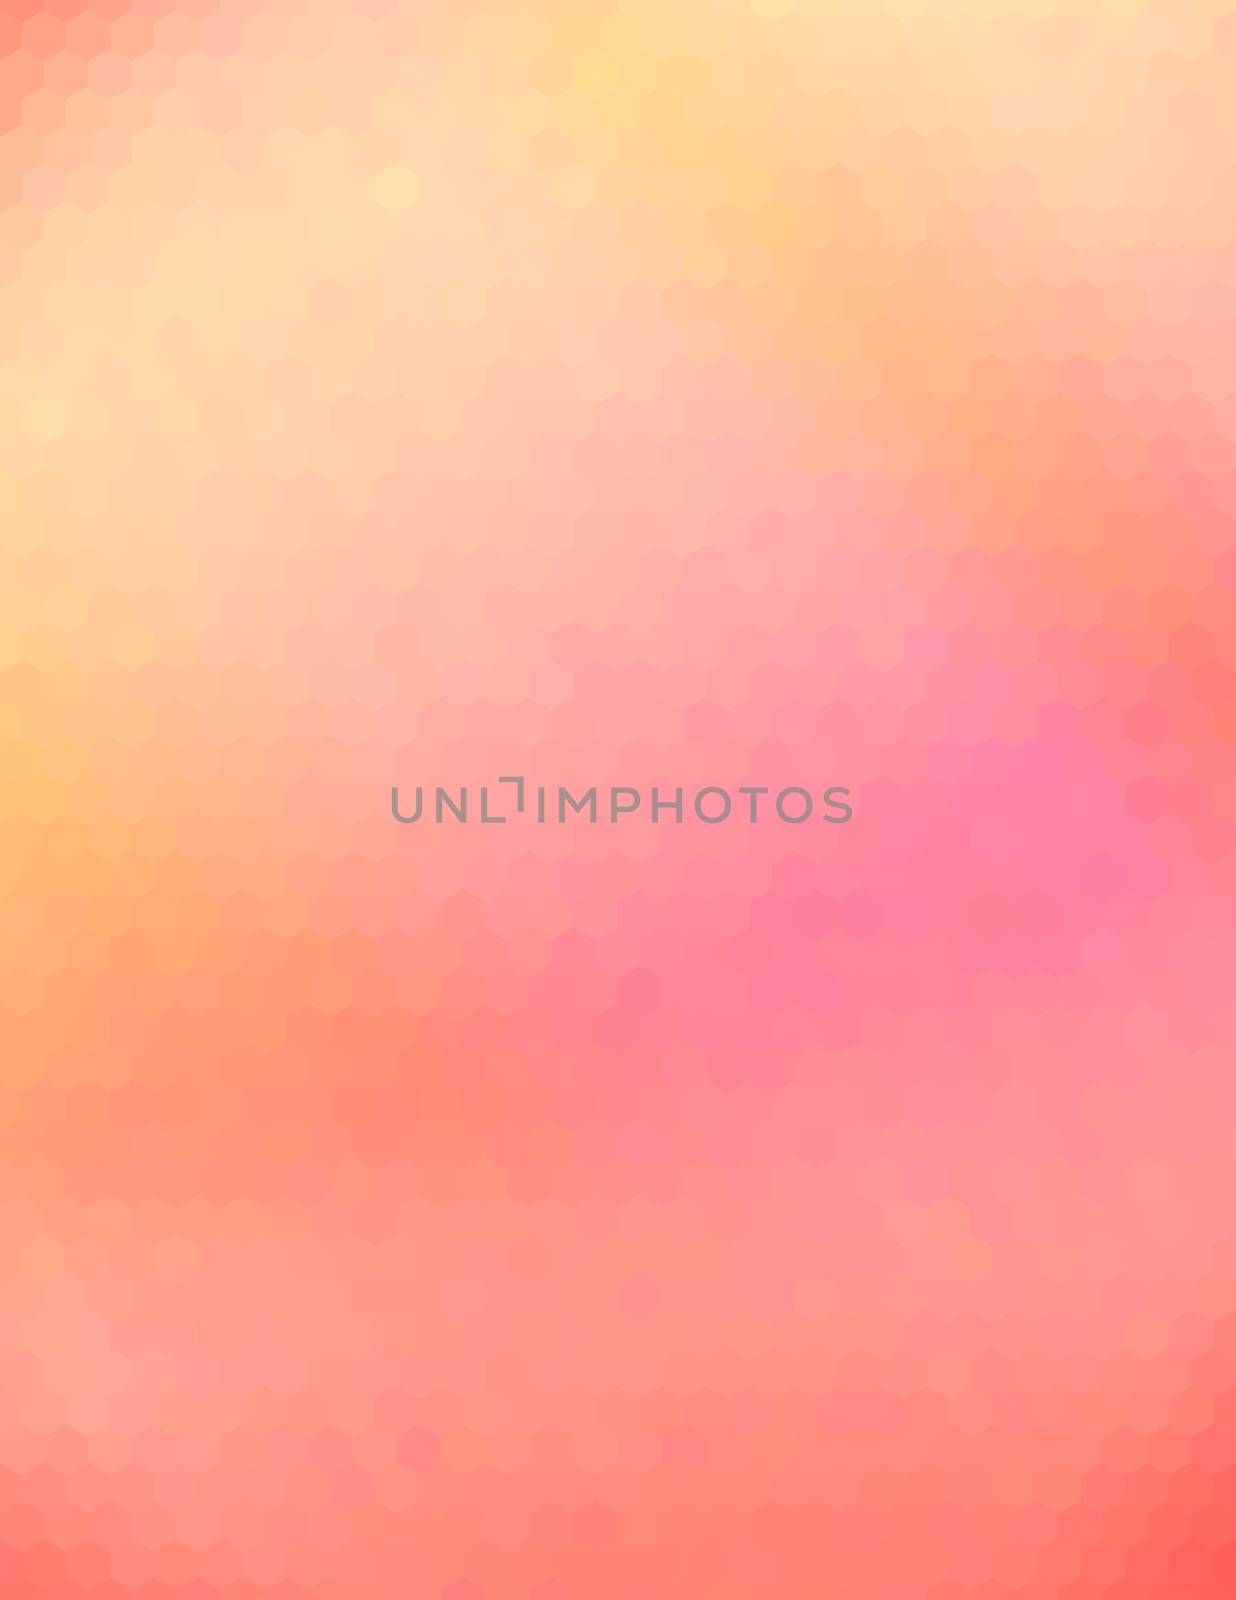 Orange pink abstract geometric background consisting of colored hexagons